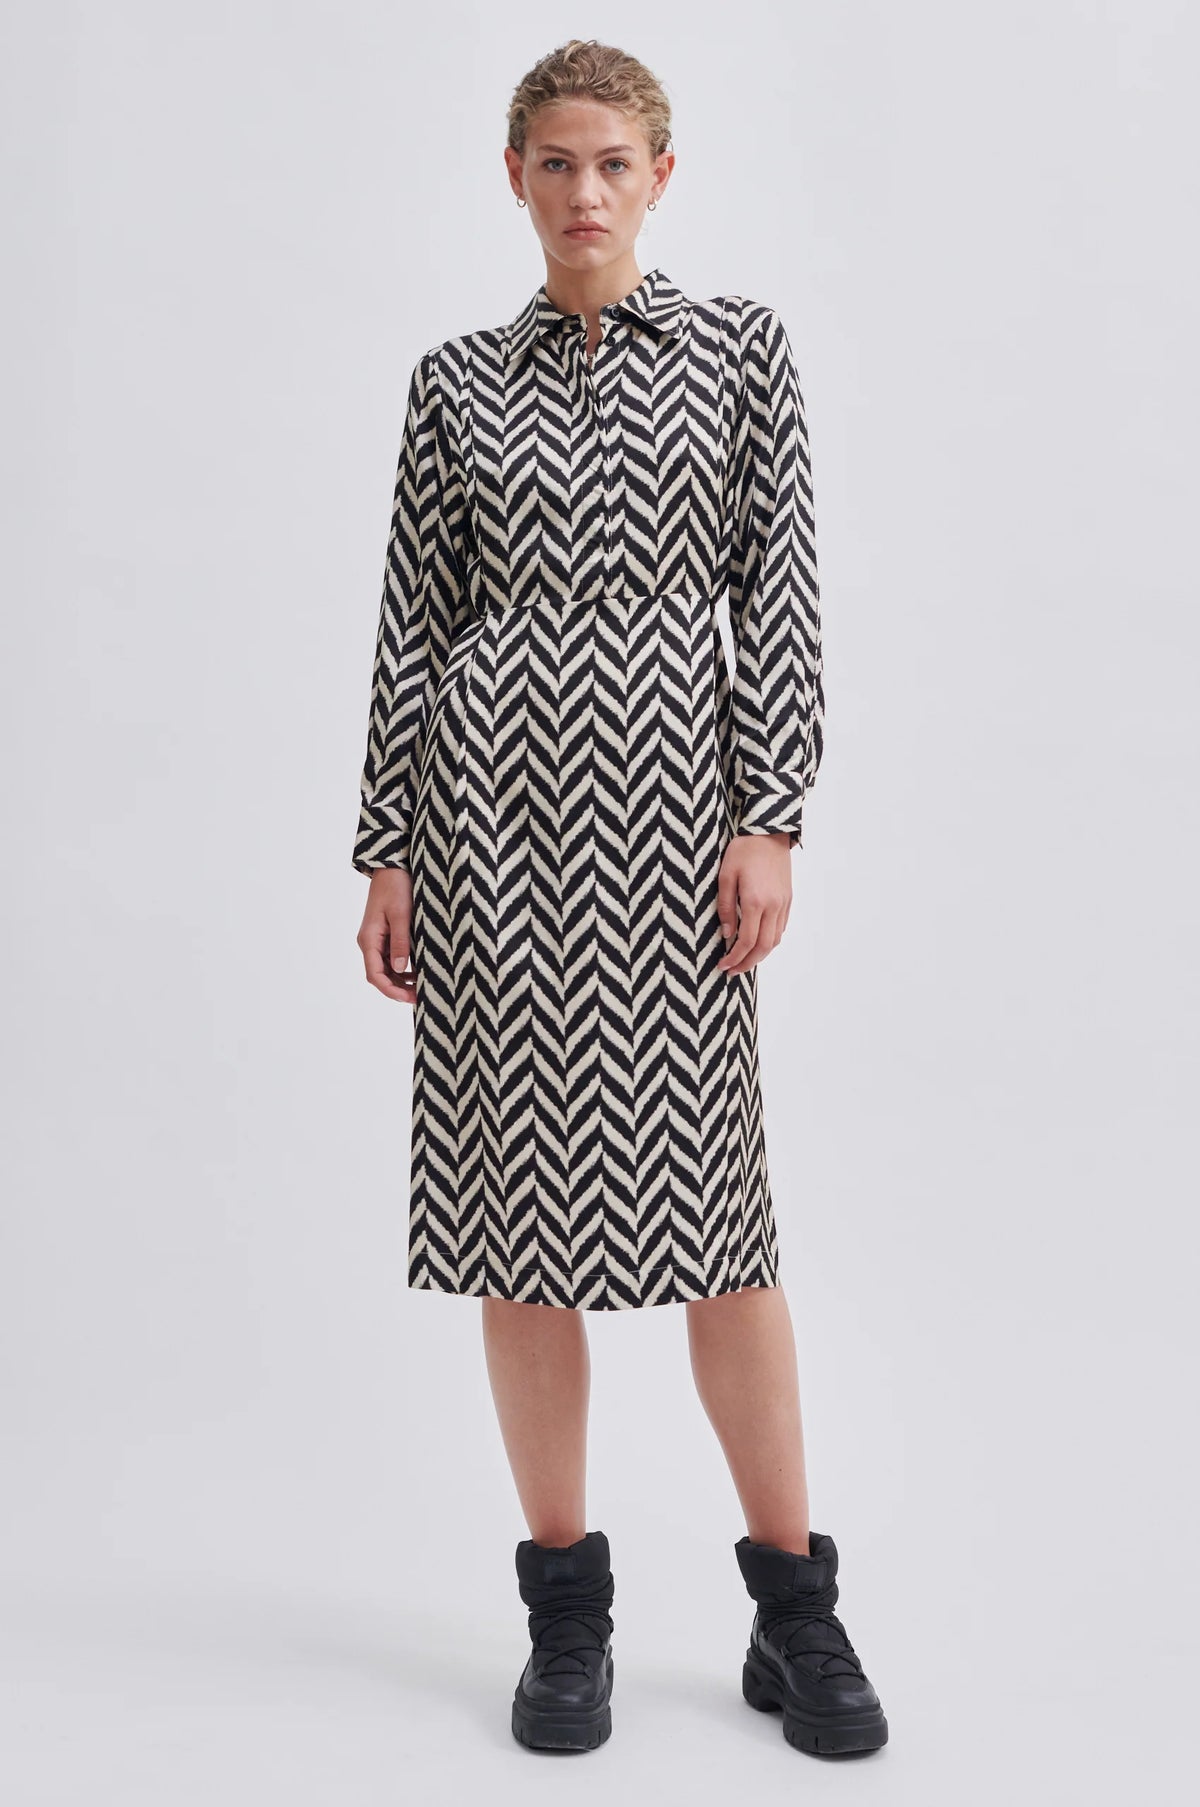 Black and cream chevron print dress with classic collar and long sleeves